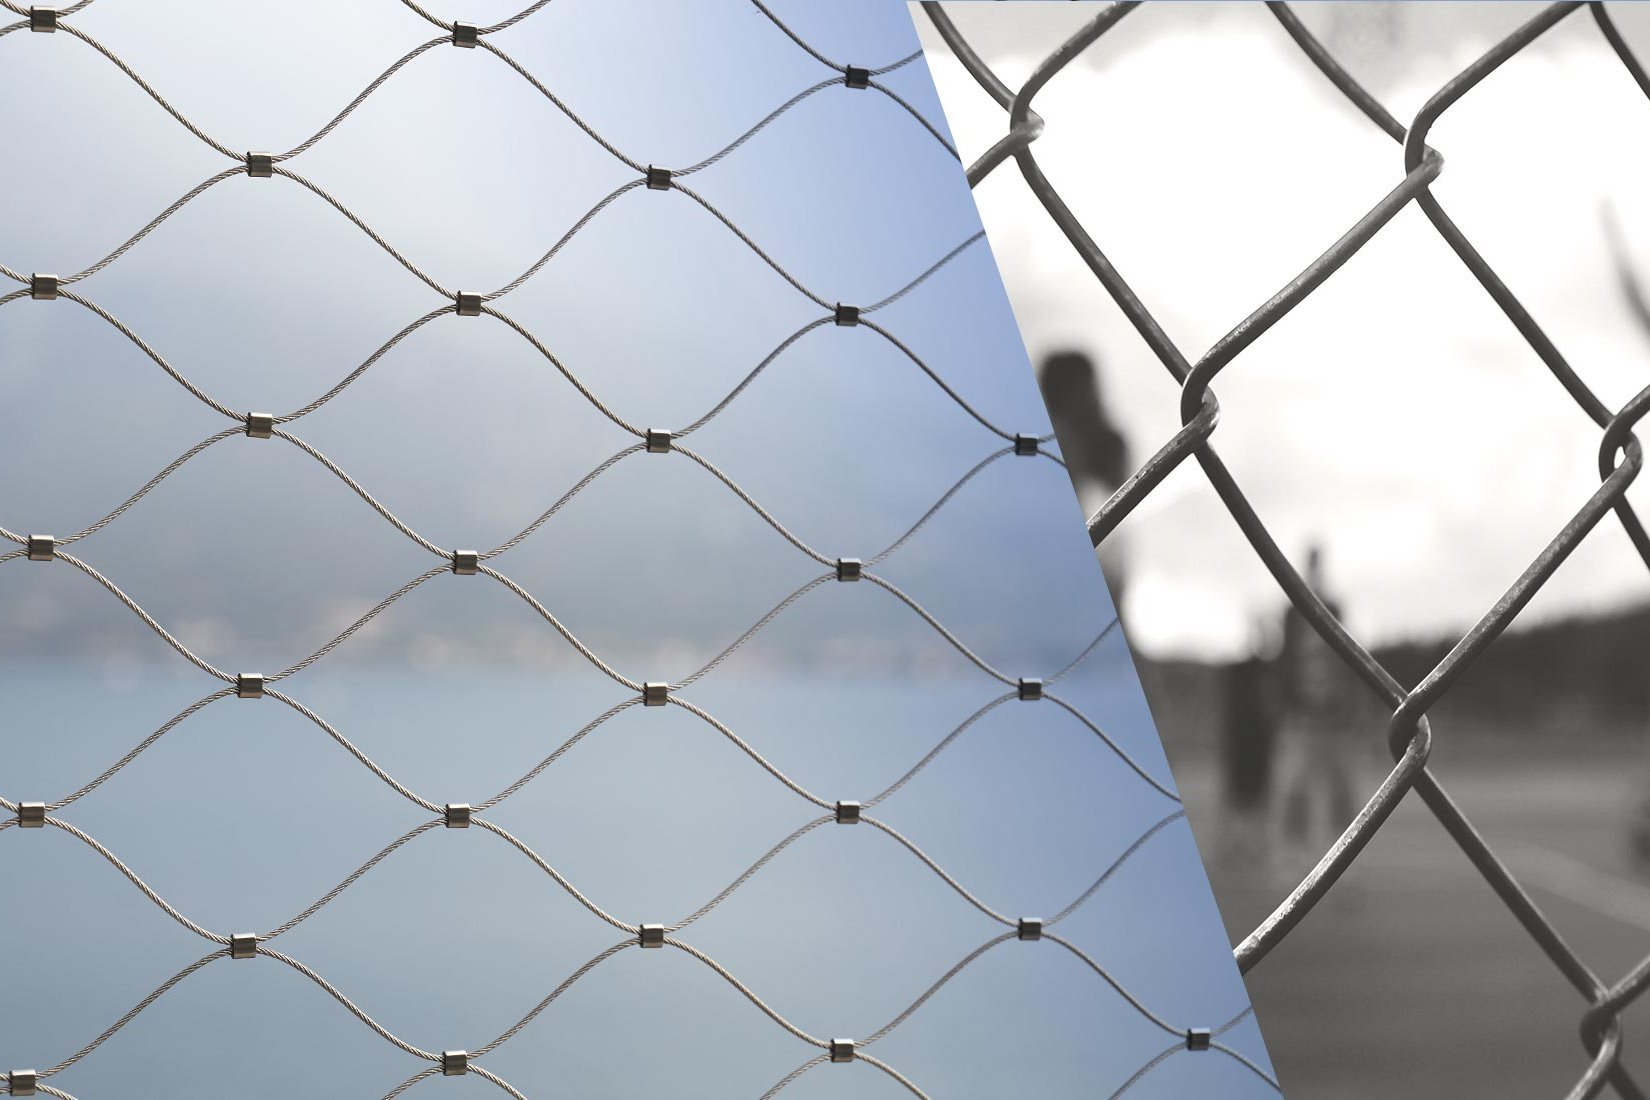 Image collage of the meshes of Webnet and of a chain link fence